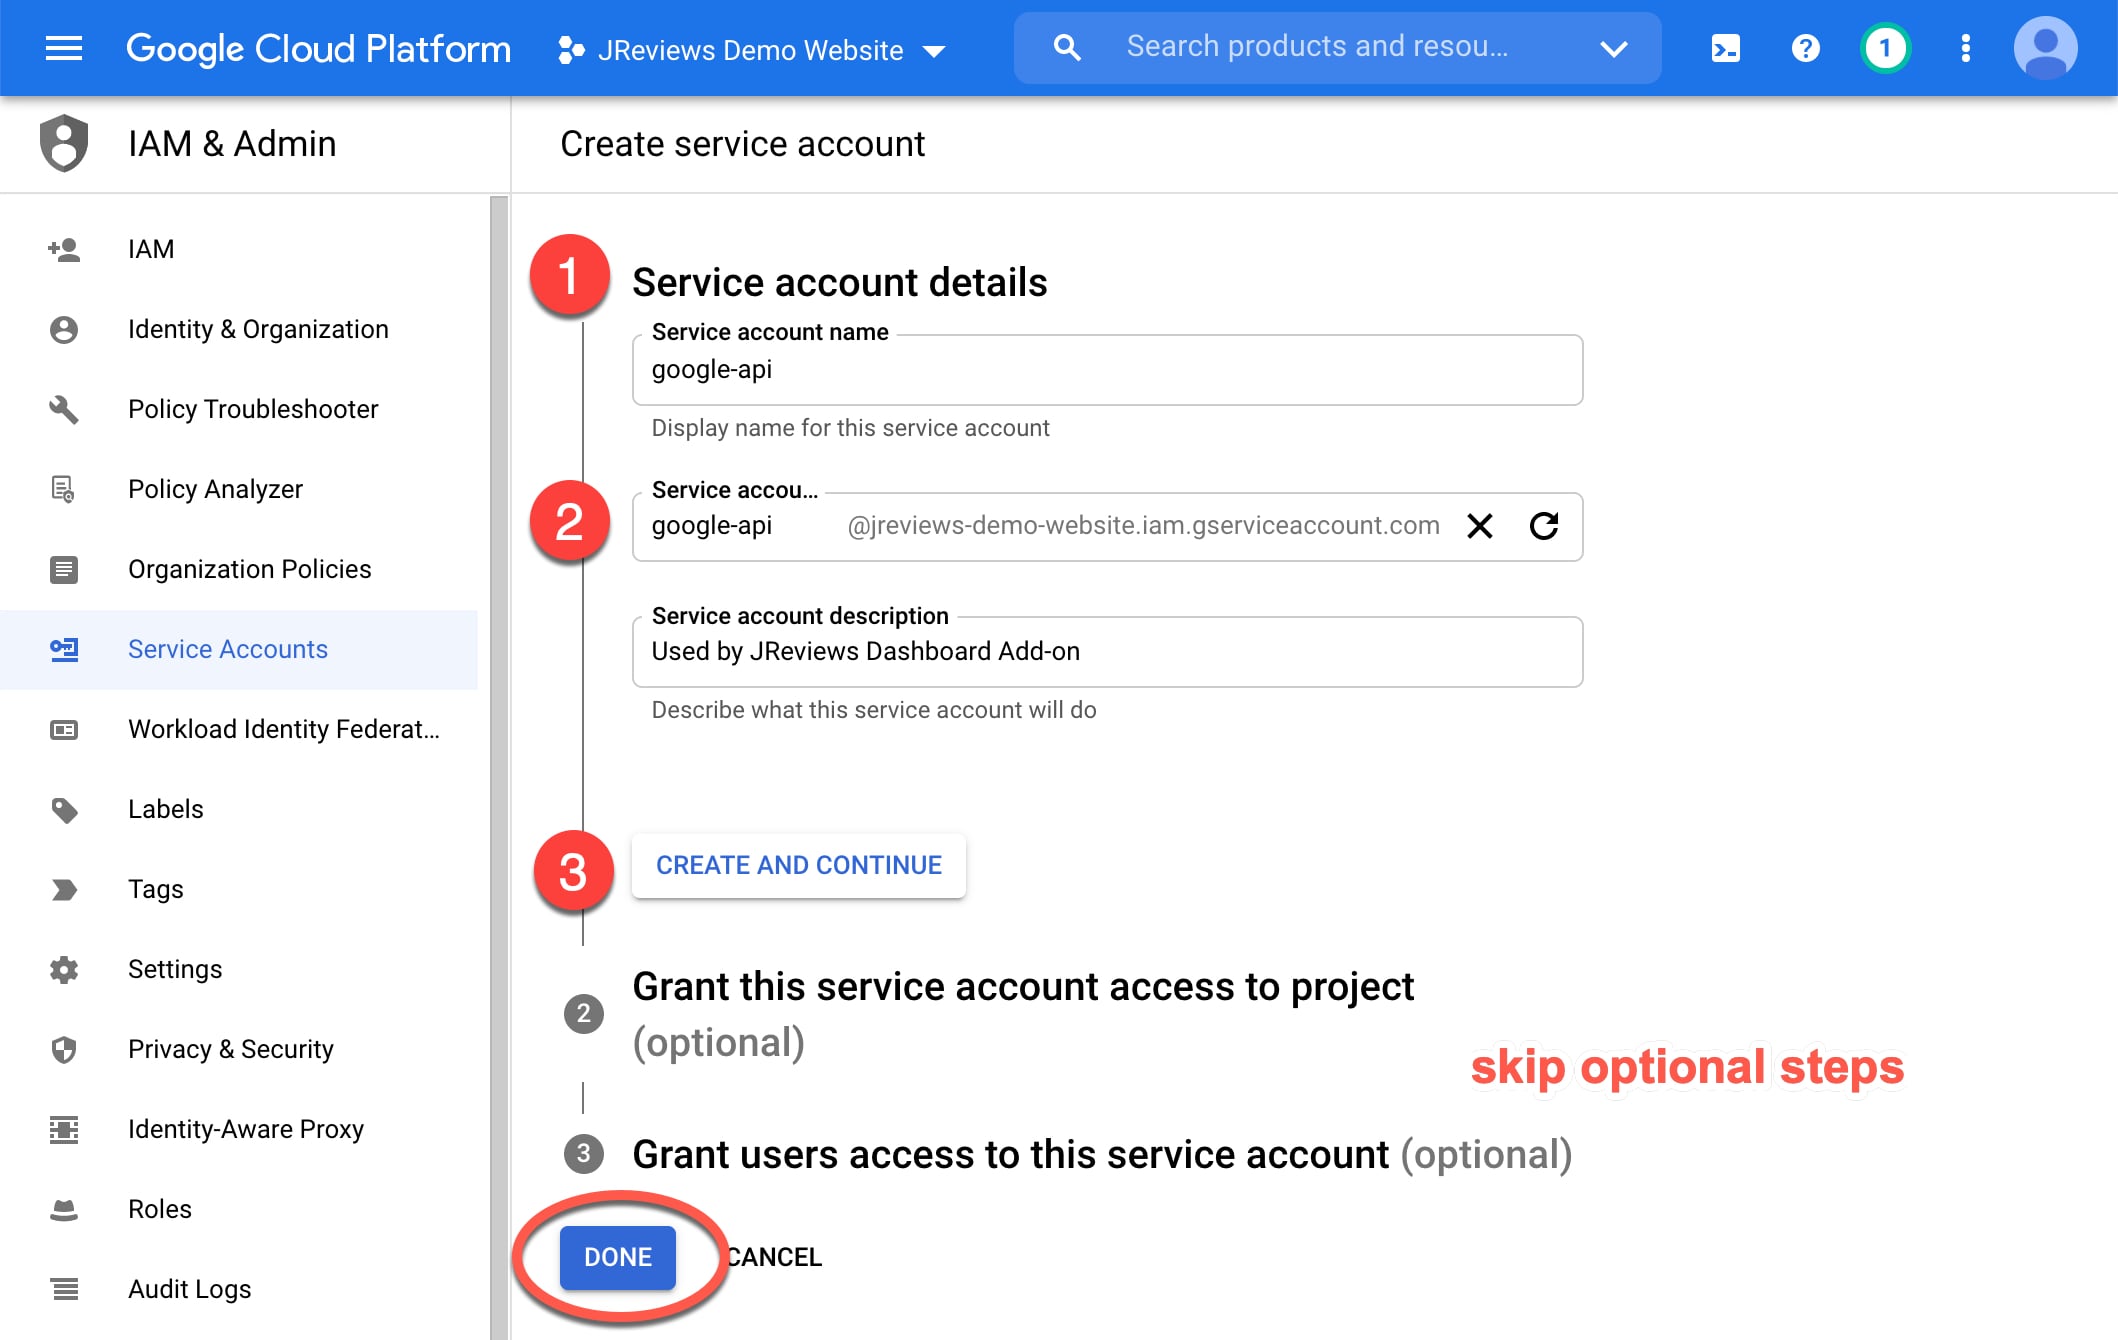 Fill out the service account details